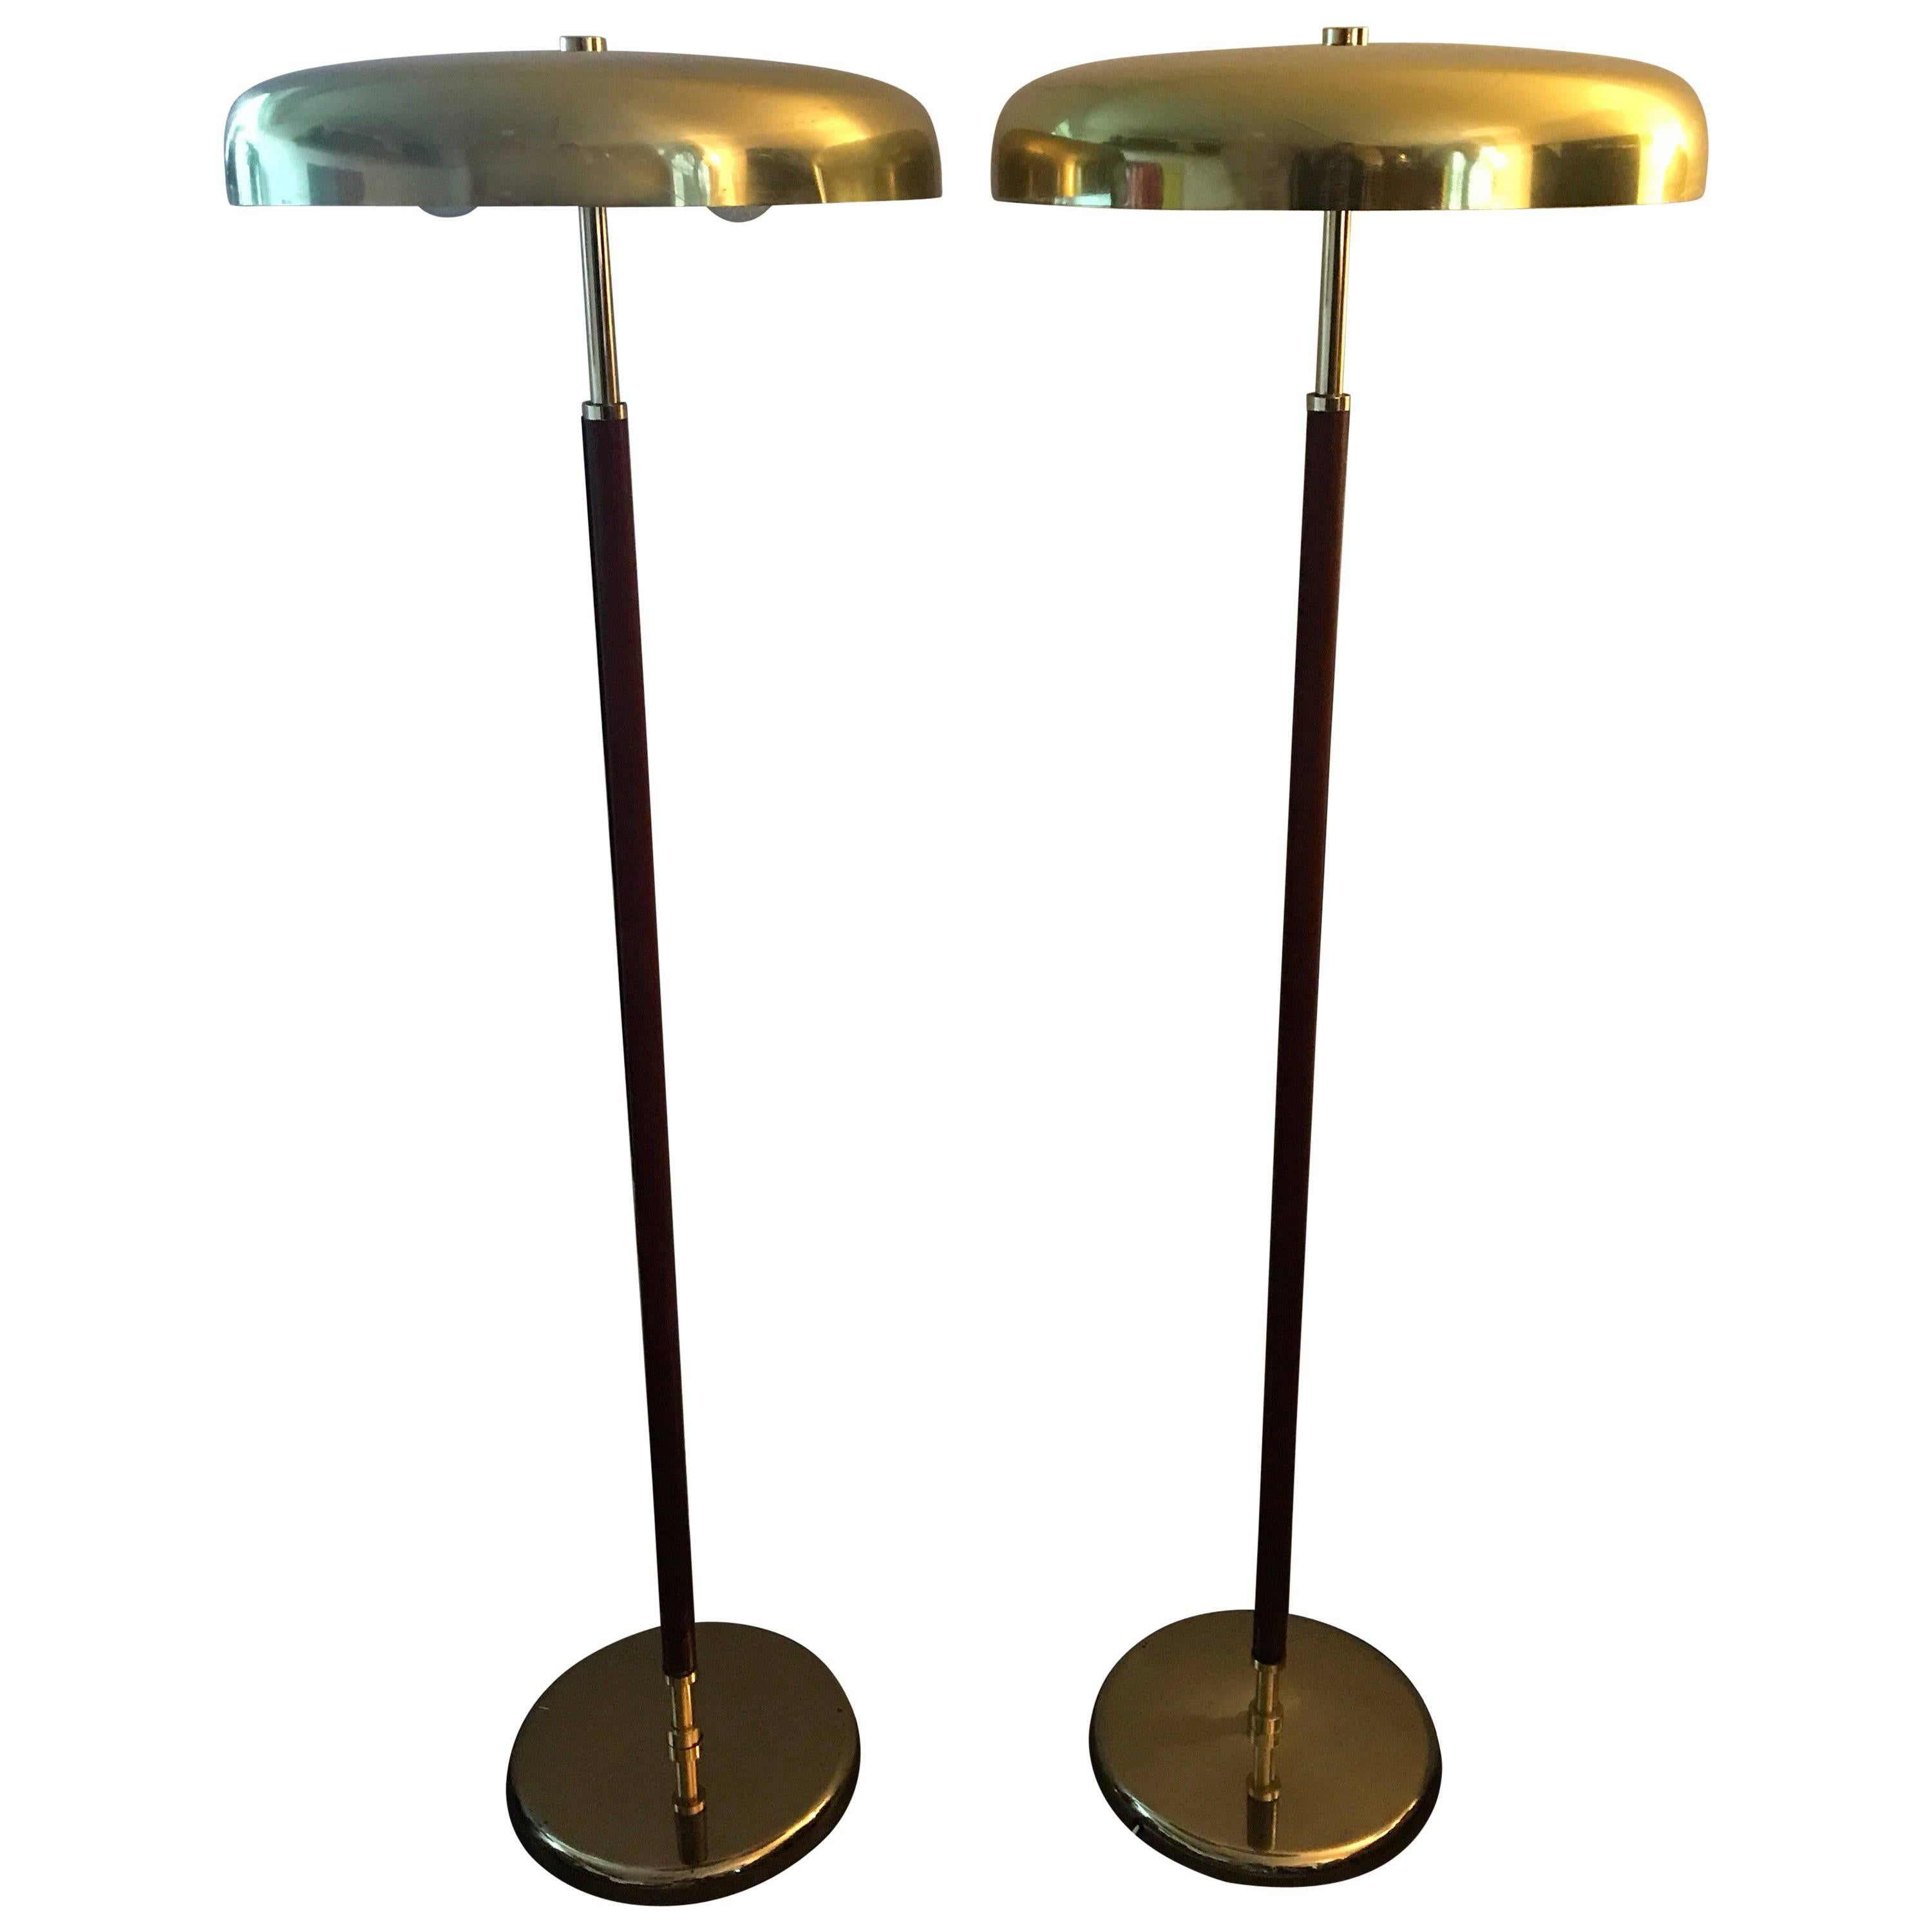 Very Rare Exclusive Swedish Brass and Leather Floor Lamp by Örsjö Industri AB For Sale